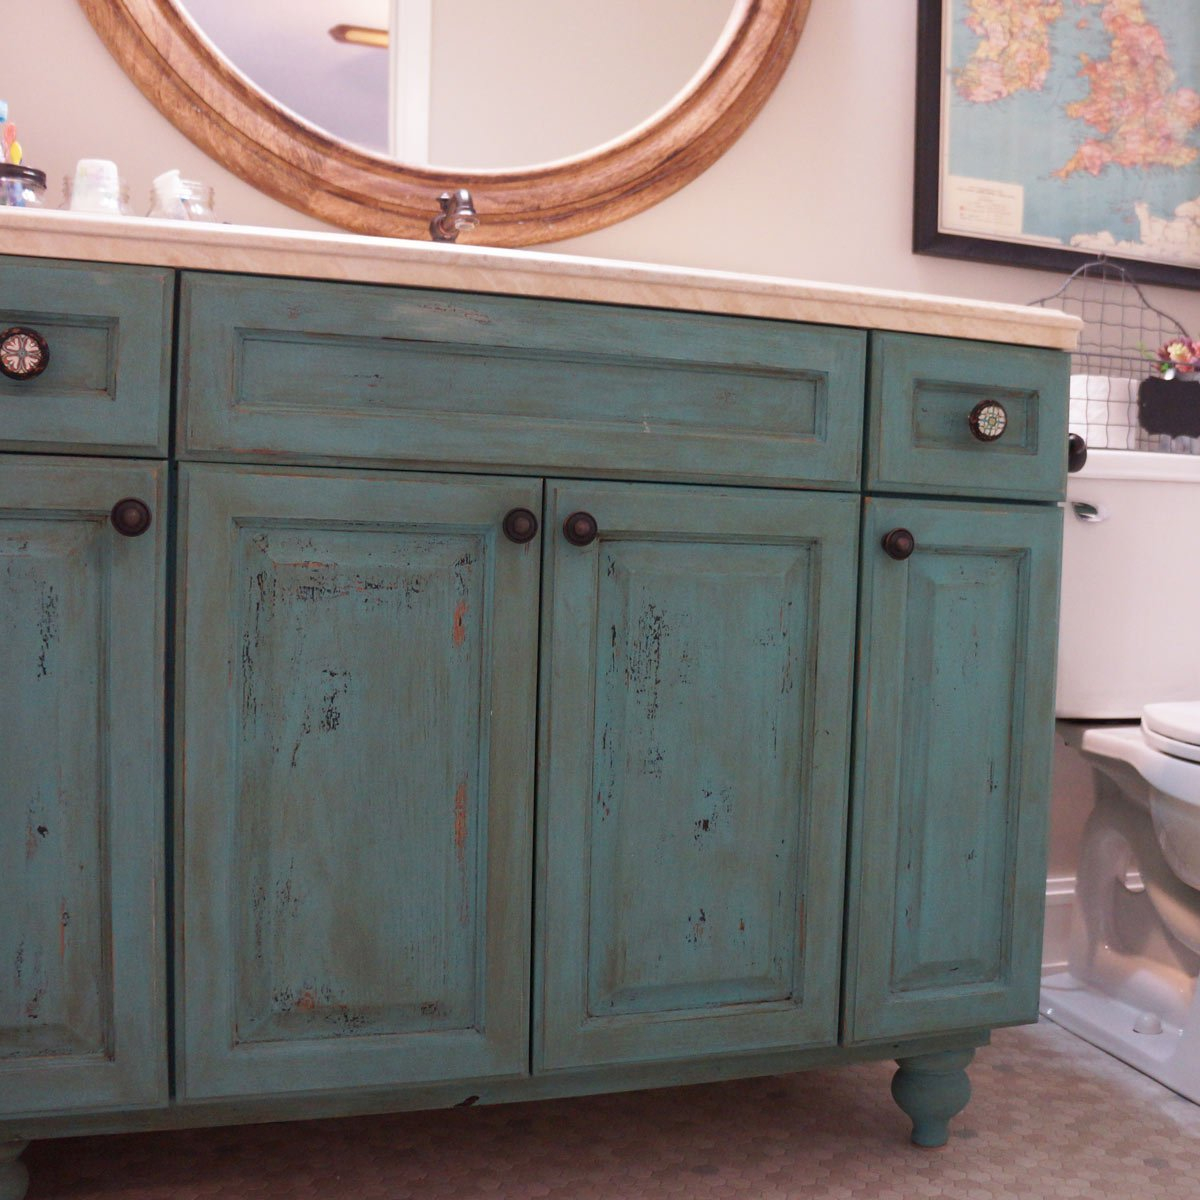 12 Astonishing Diy Bathroom Vanity Makeovers The Family Handyman intended for size 1200 X 1200